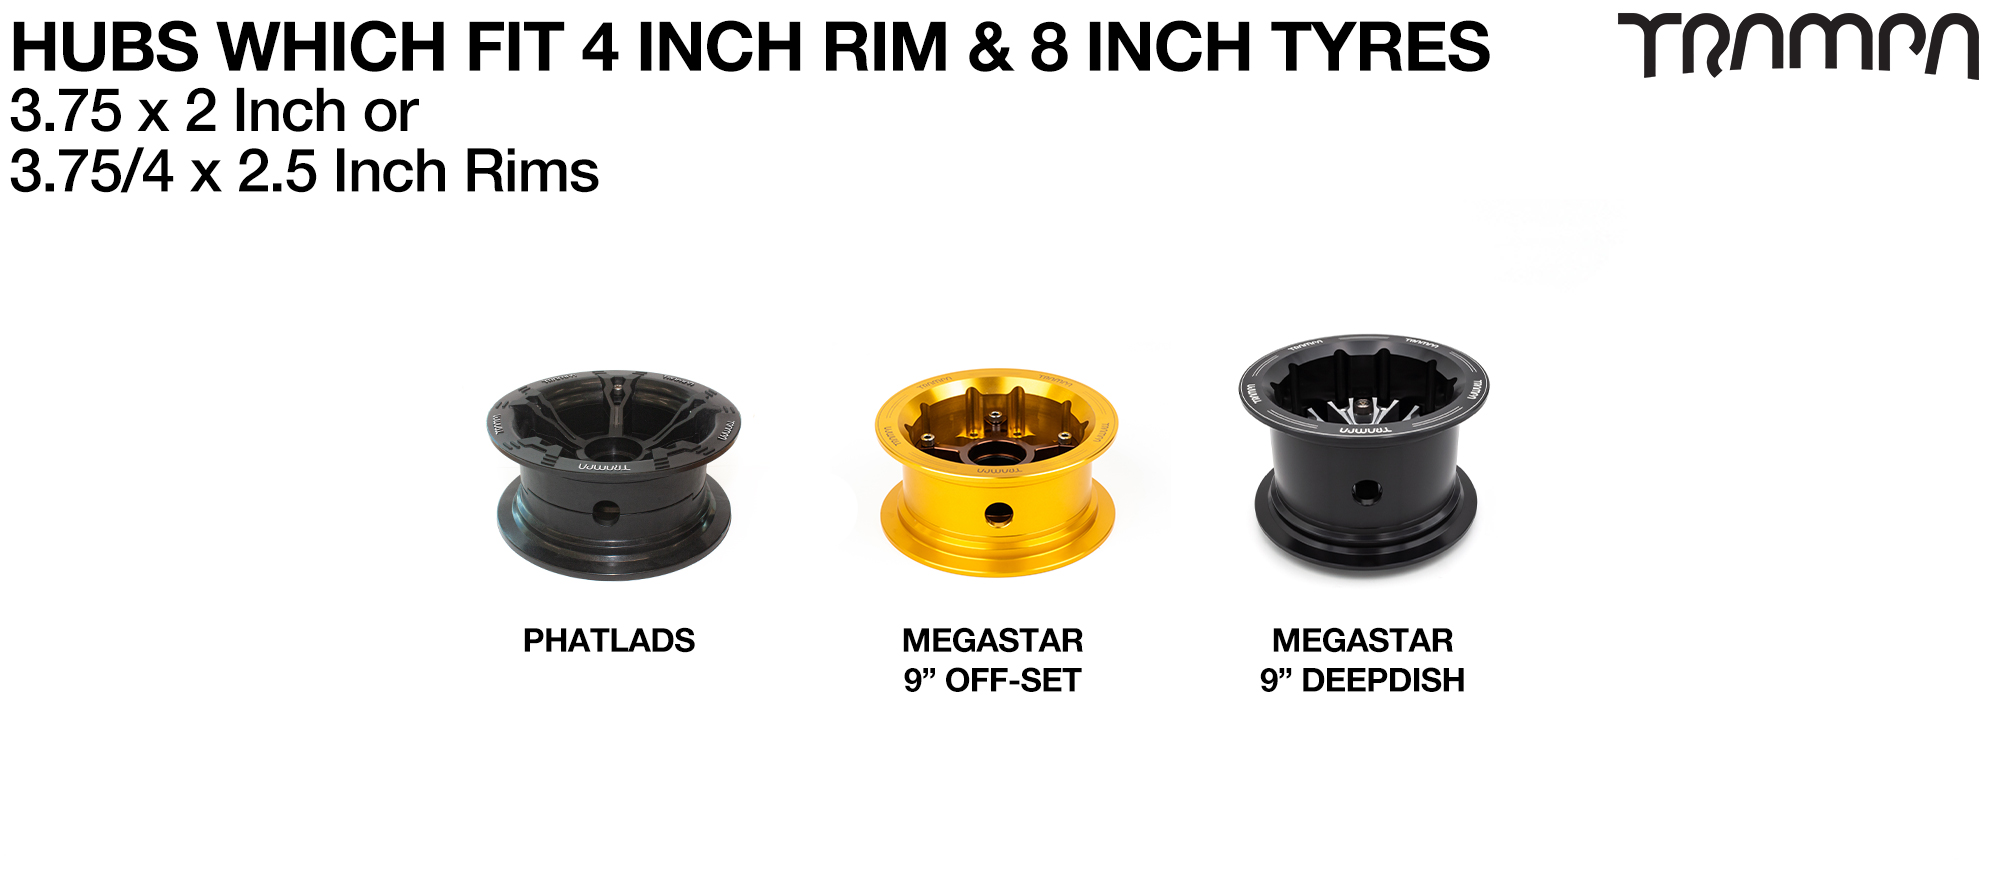 GO-KART SLICK 8 Inch Tyre measure 4x 3x 8 Inch or 200x 75 with 4 Inch Rim fits all 4 Inch Hubs - Set of 4 